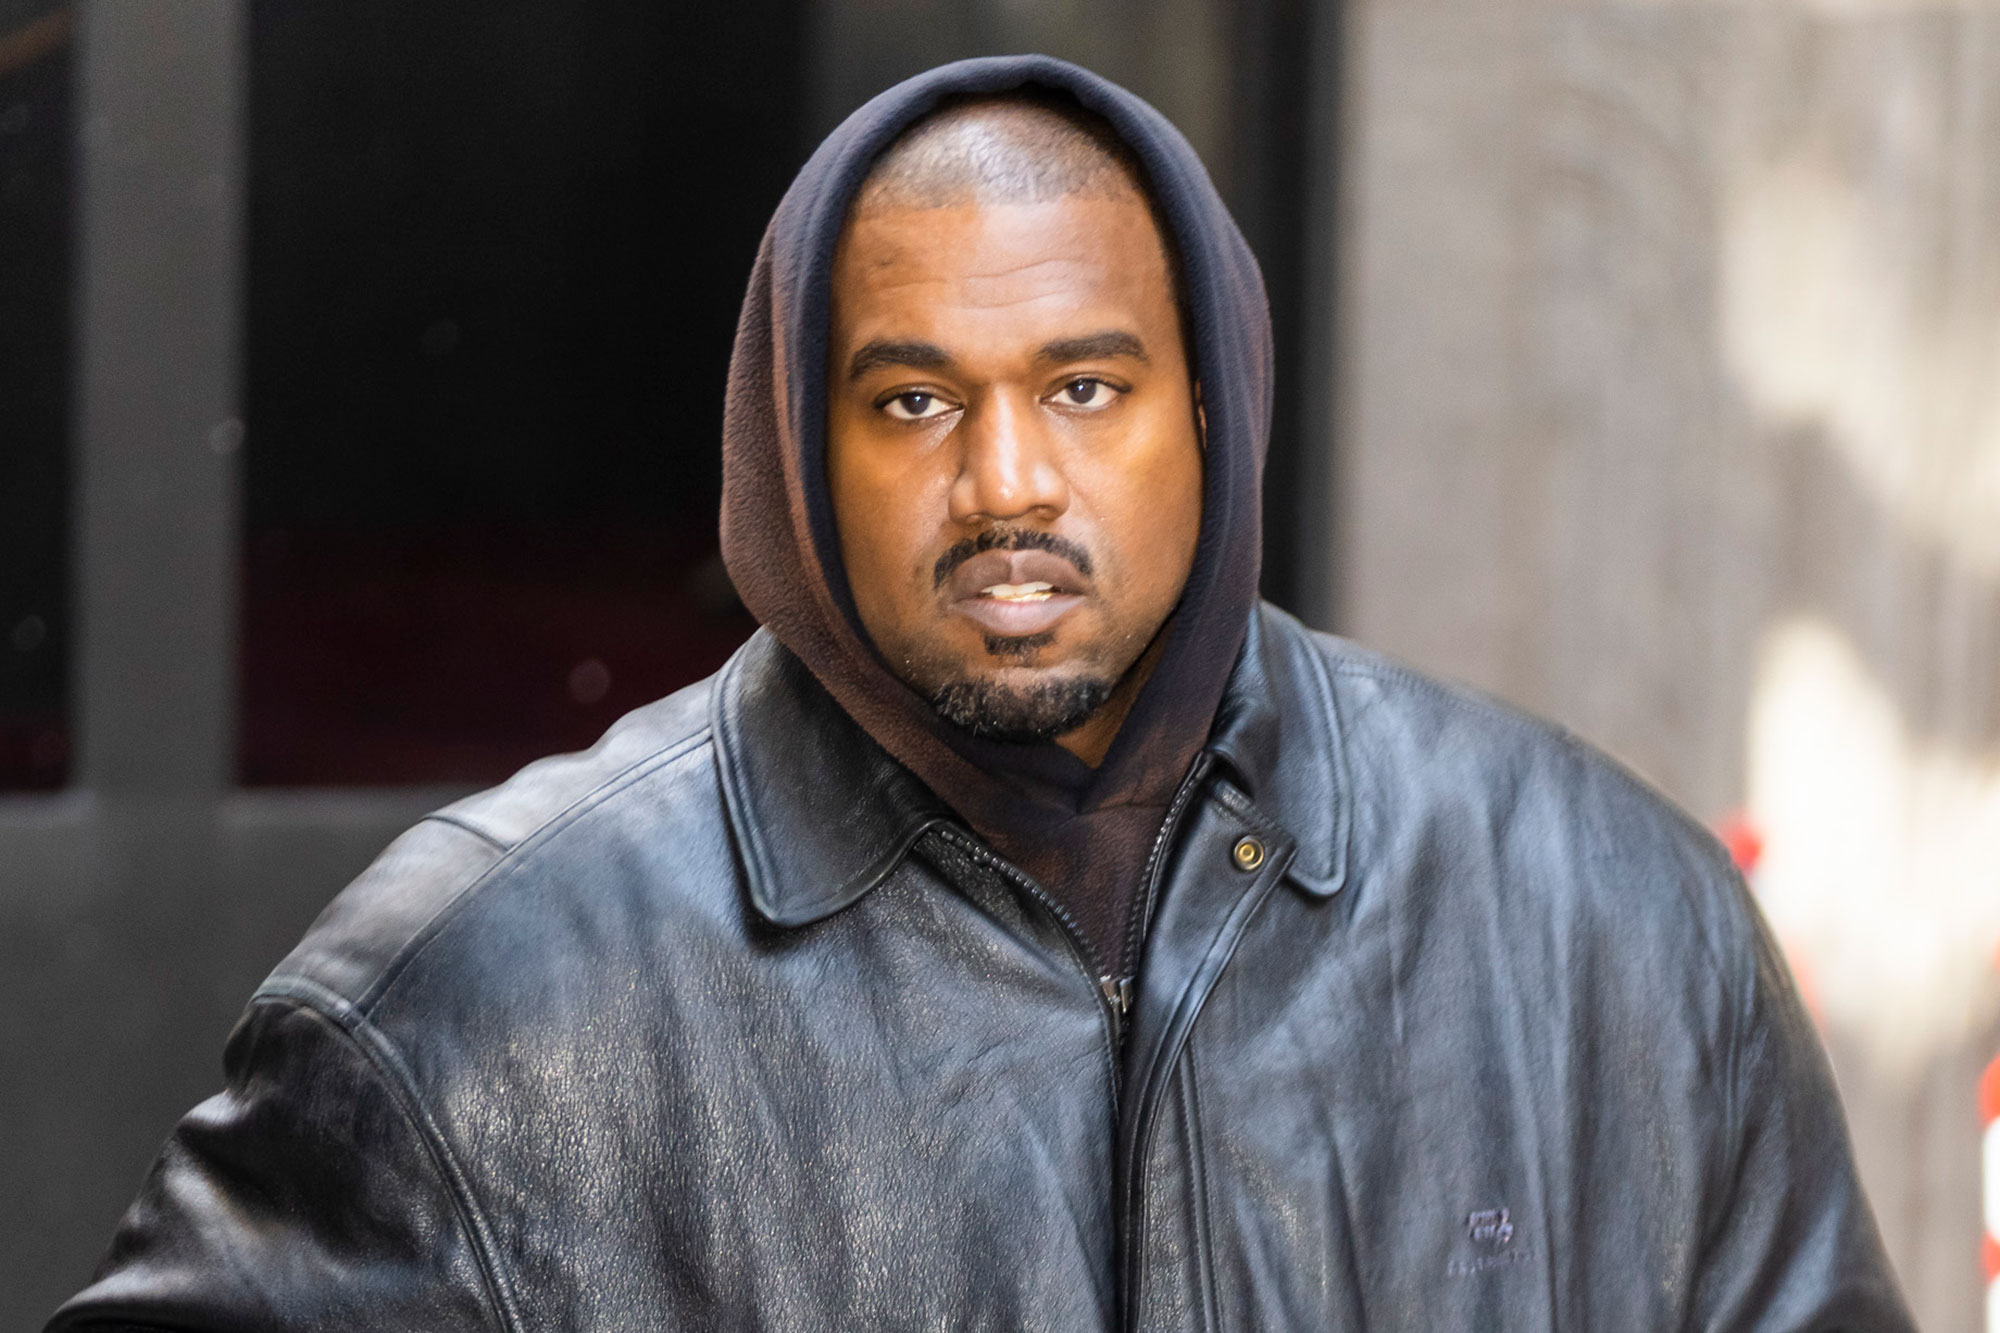 Kanye West suspended from Twitter again after sharing swastika post